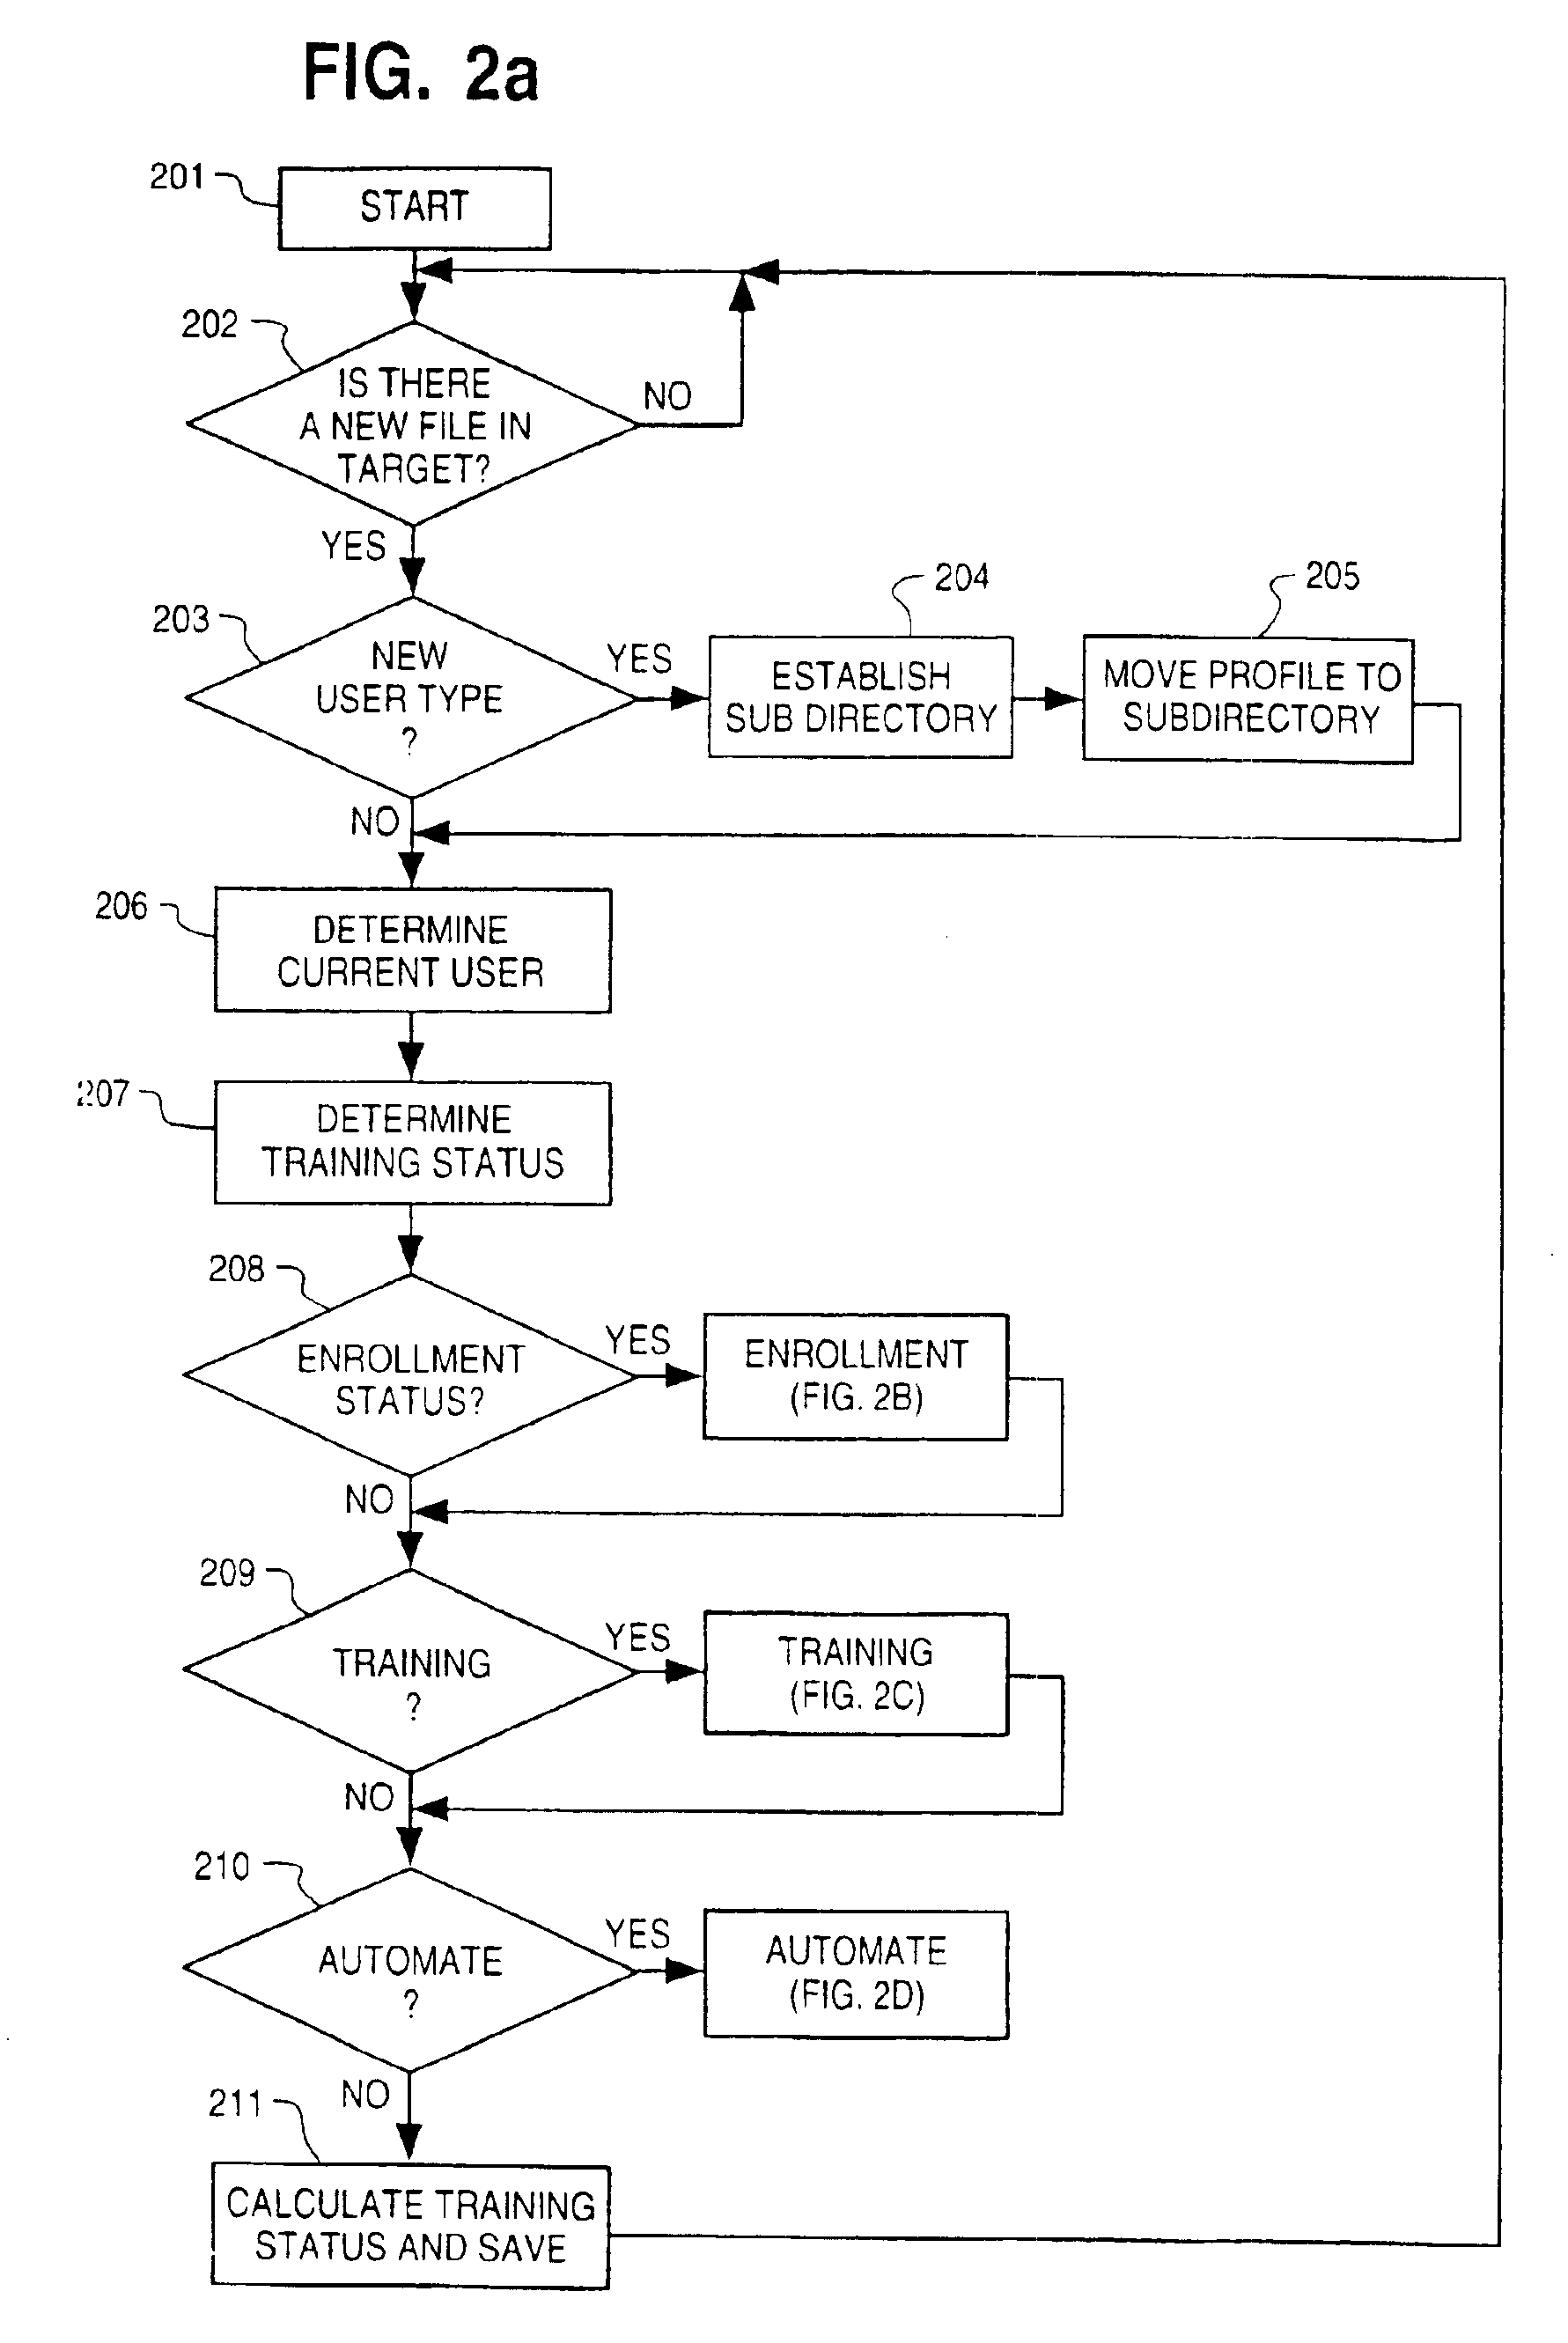 Automated transcription system and method using two speech converting instances and computer-assisted correction